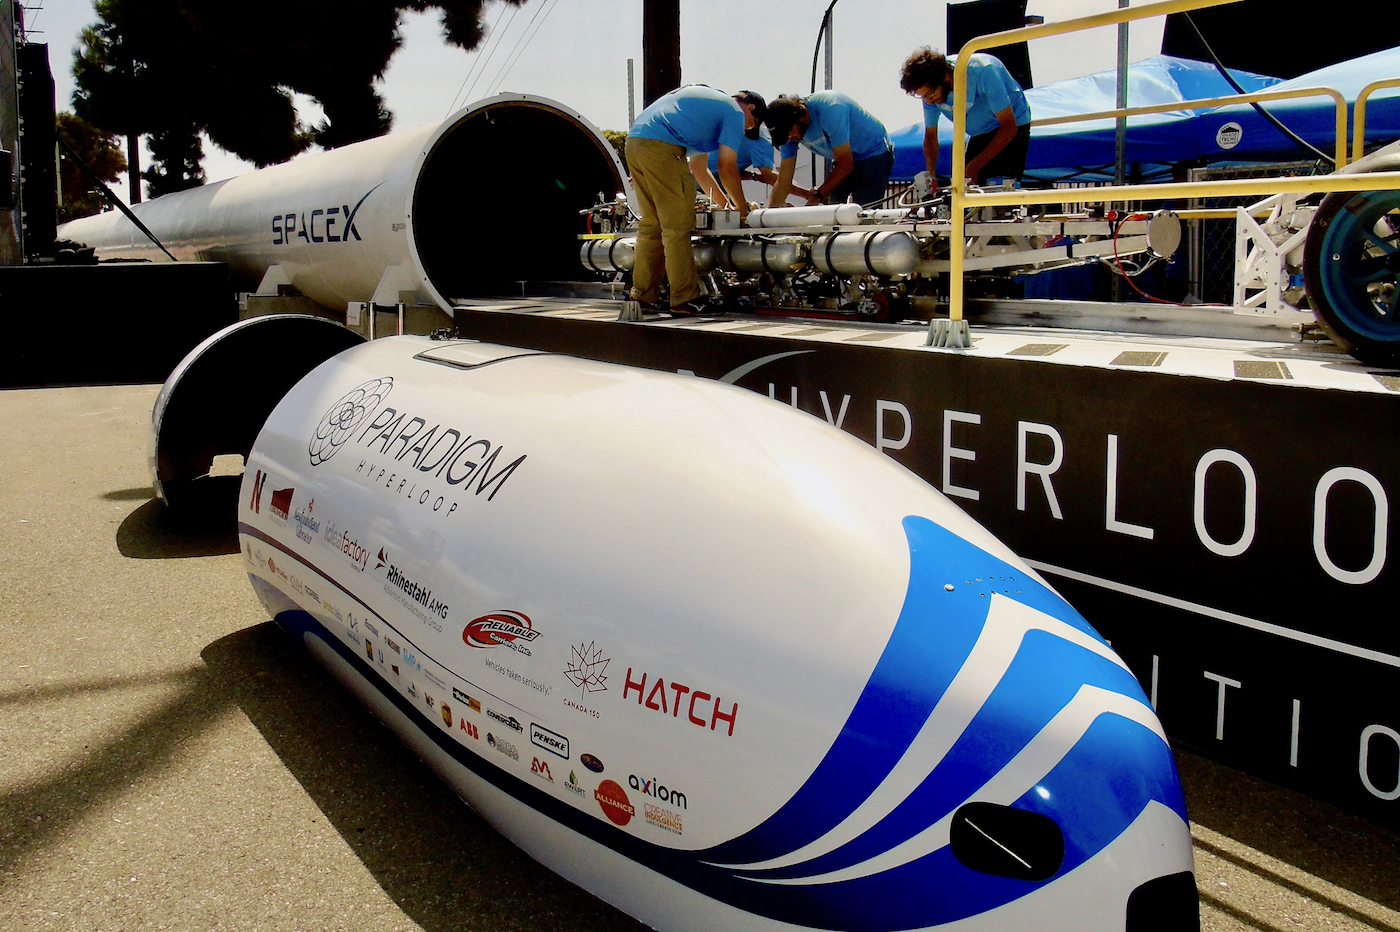 Paradigm Hyperloop came in second on Sunday at the SpaceX Hyperloop Pod Competition. Photo courtesy of Luke Merkl.